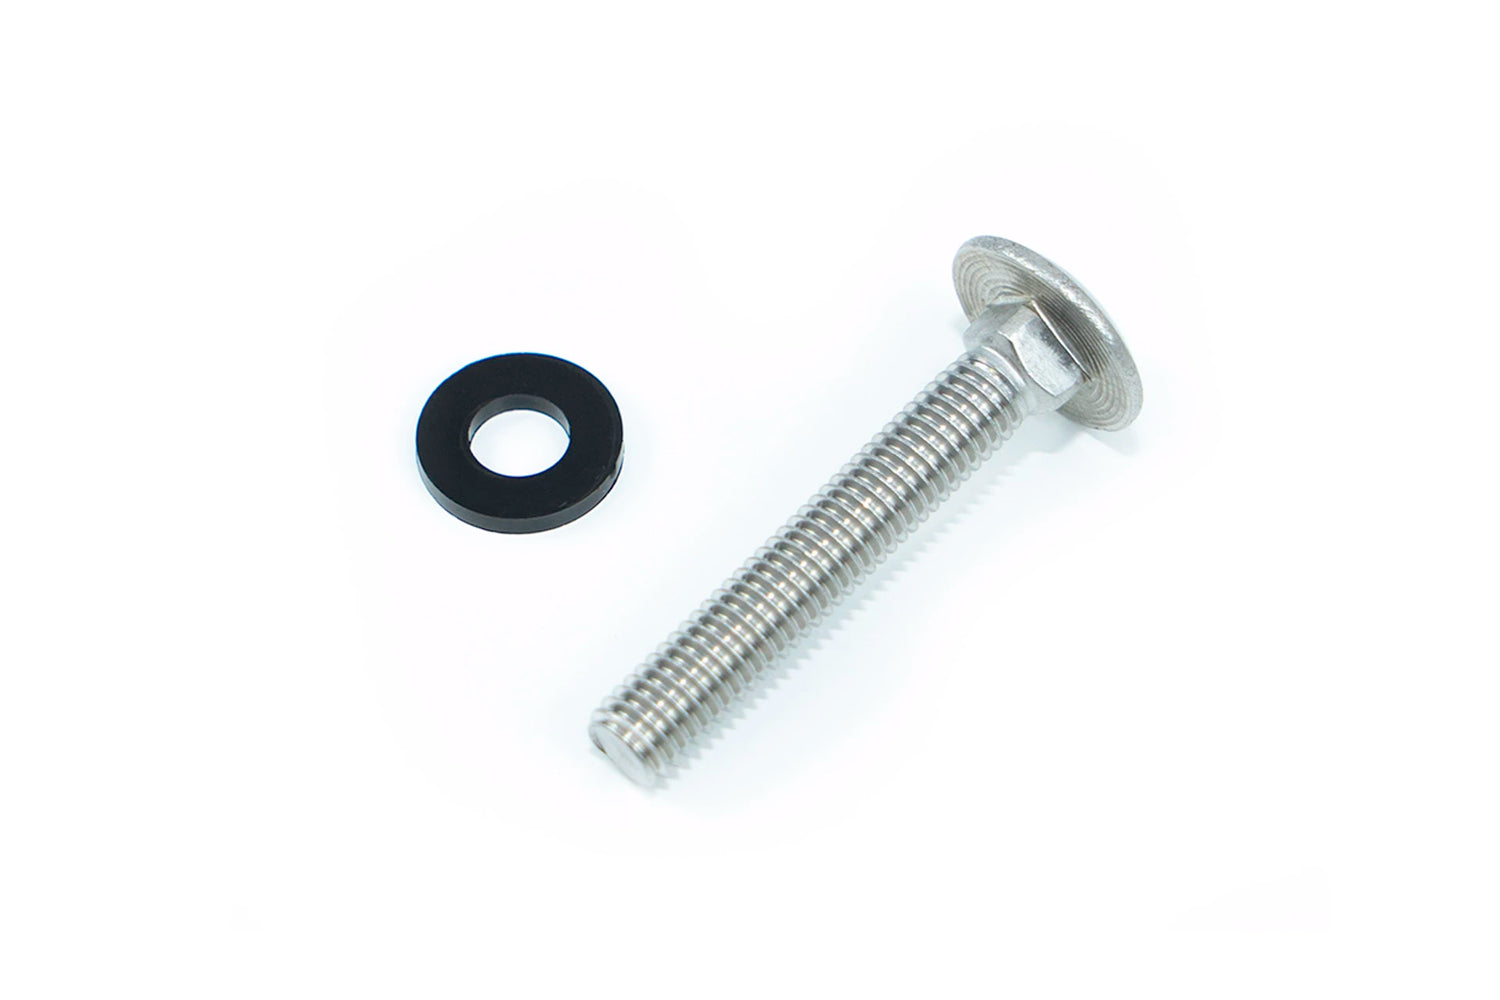 Lagun replacement handle with screw